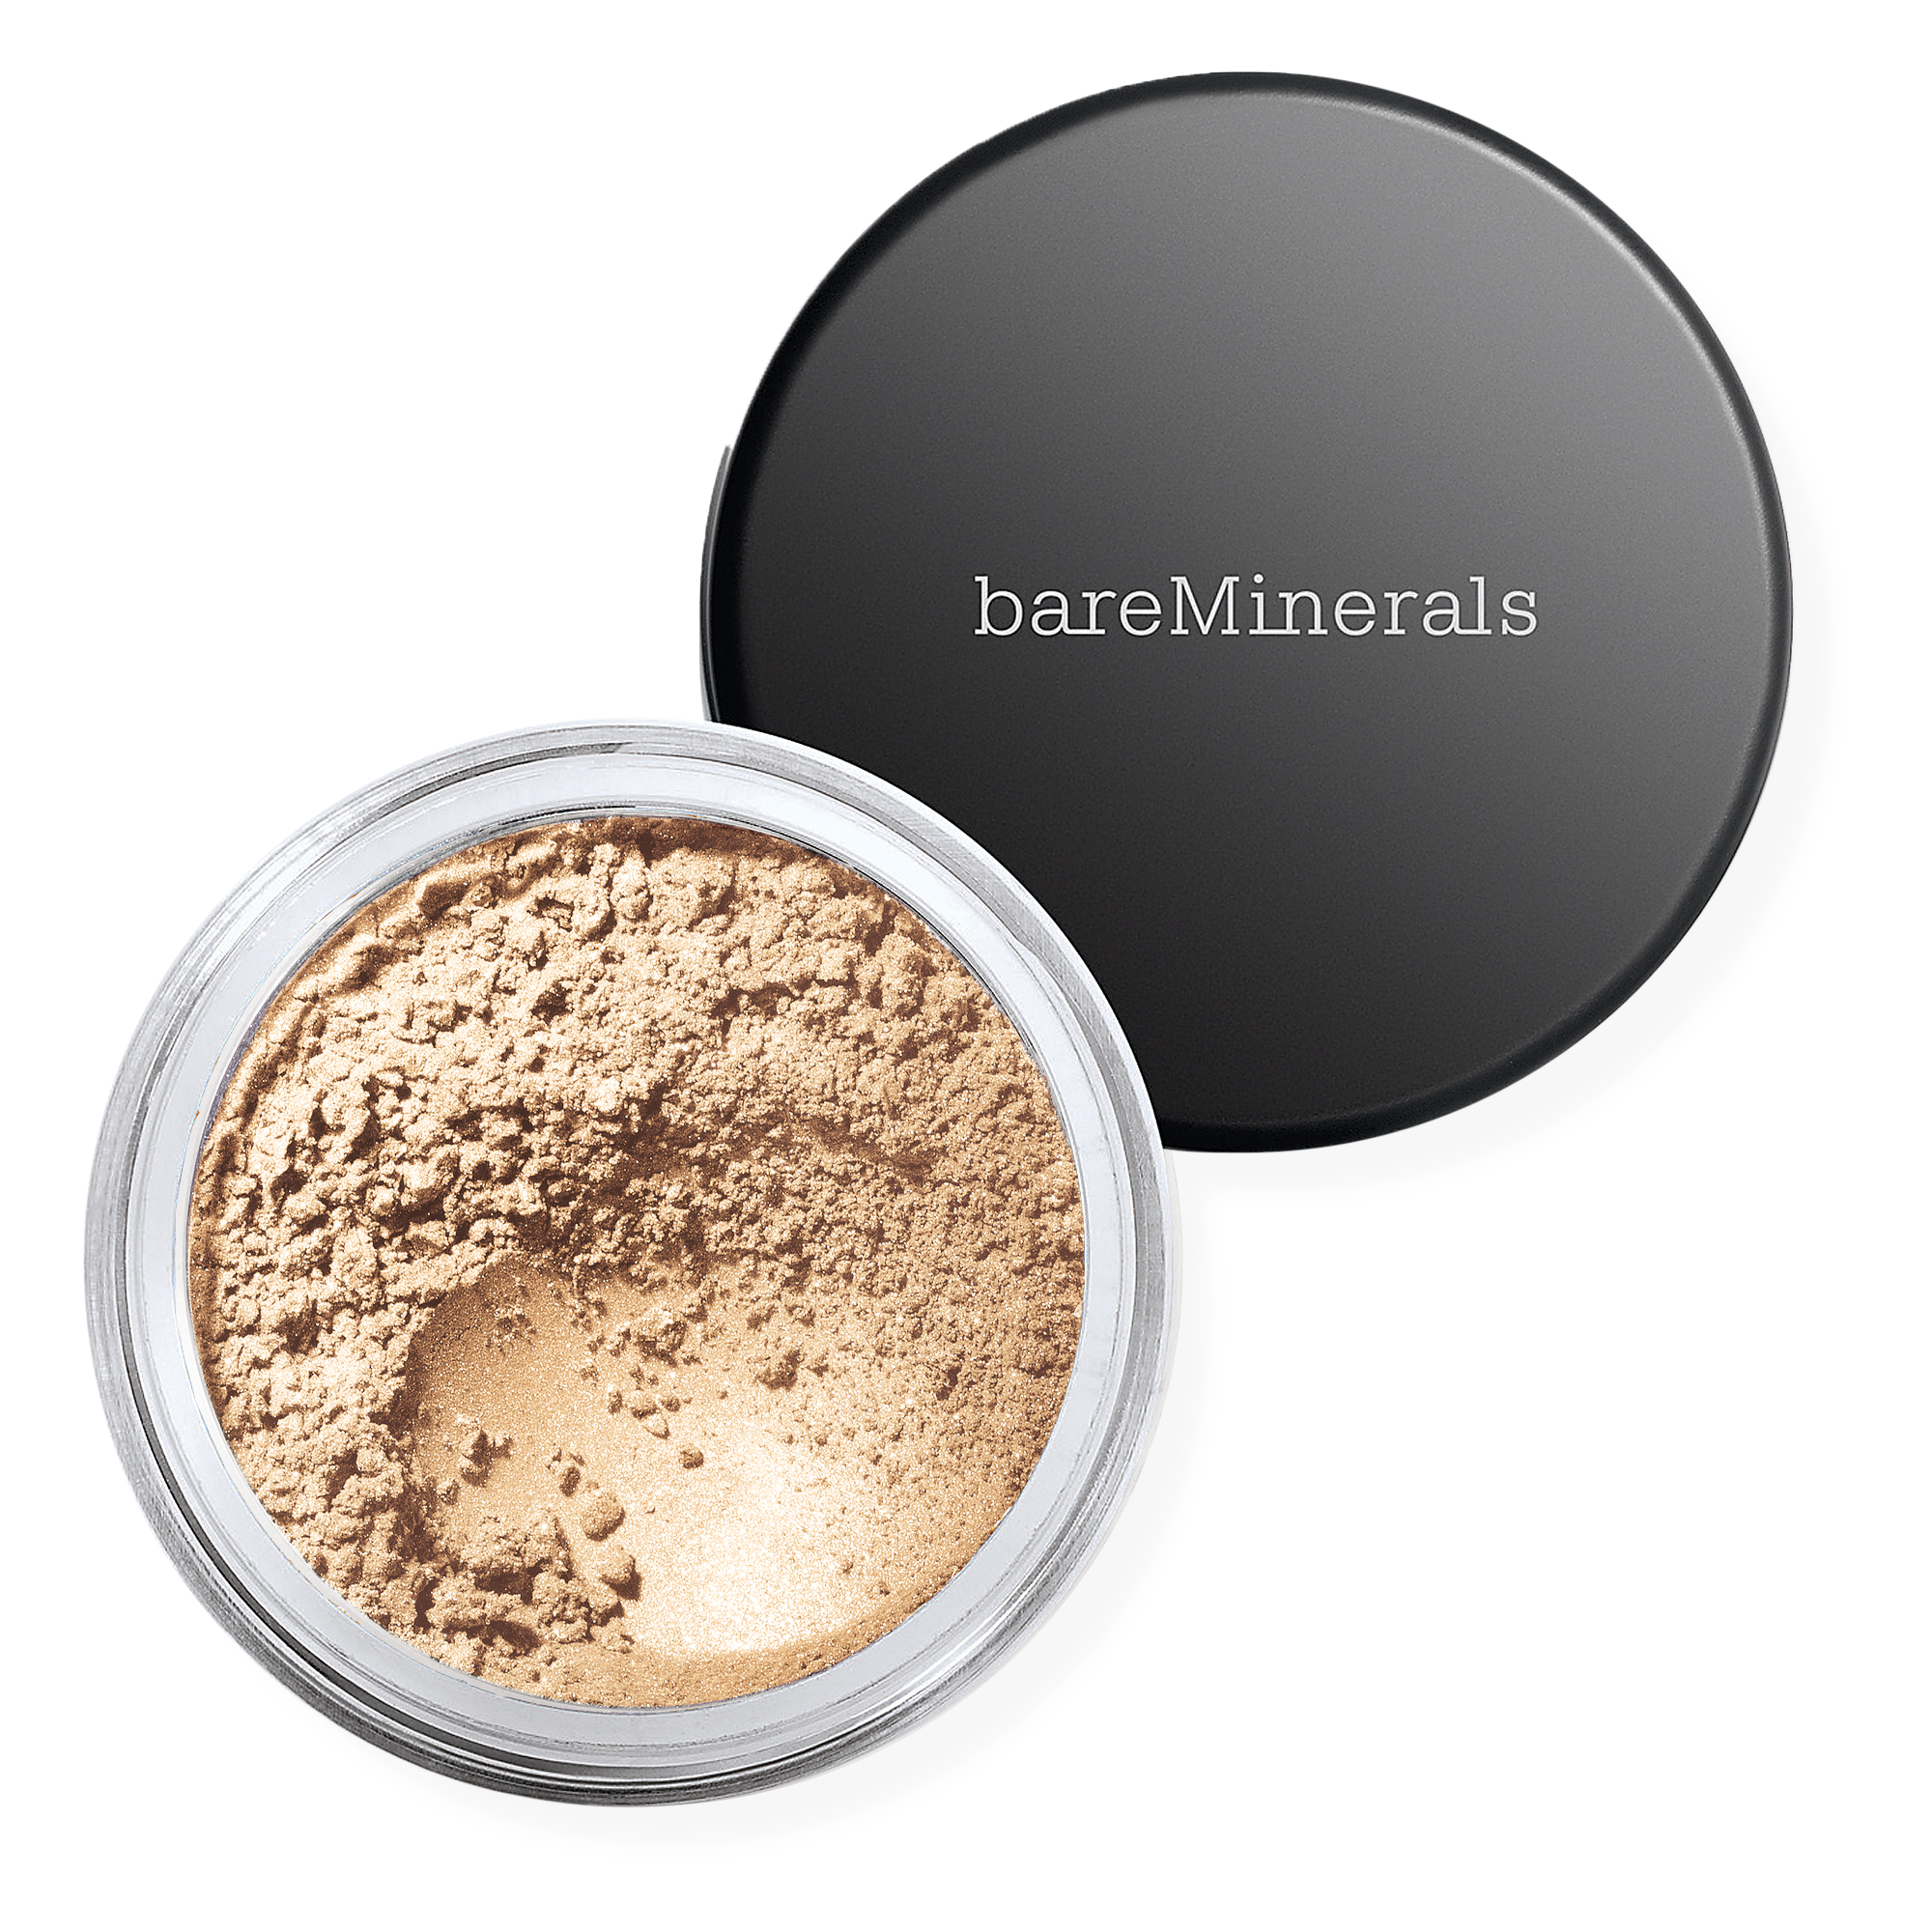 bareMinerals Loose Mineral Eyecolor / QUEEN PHYLLIS